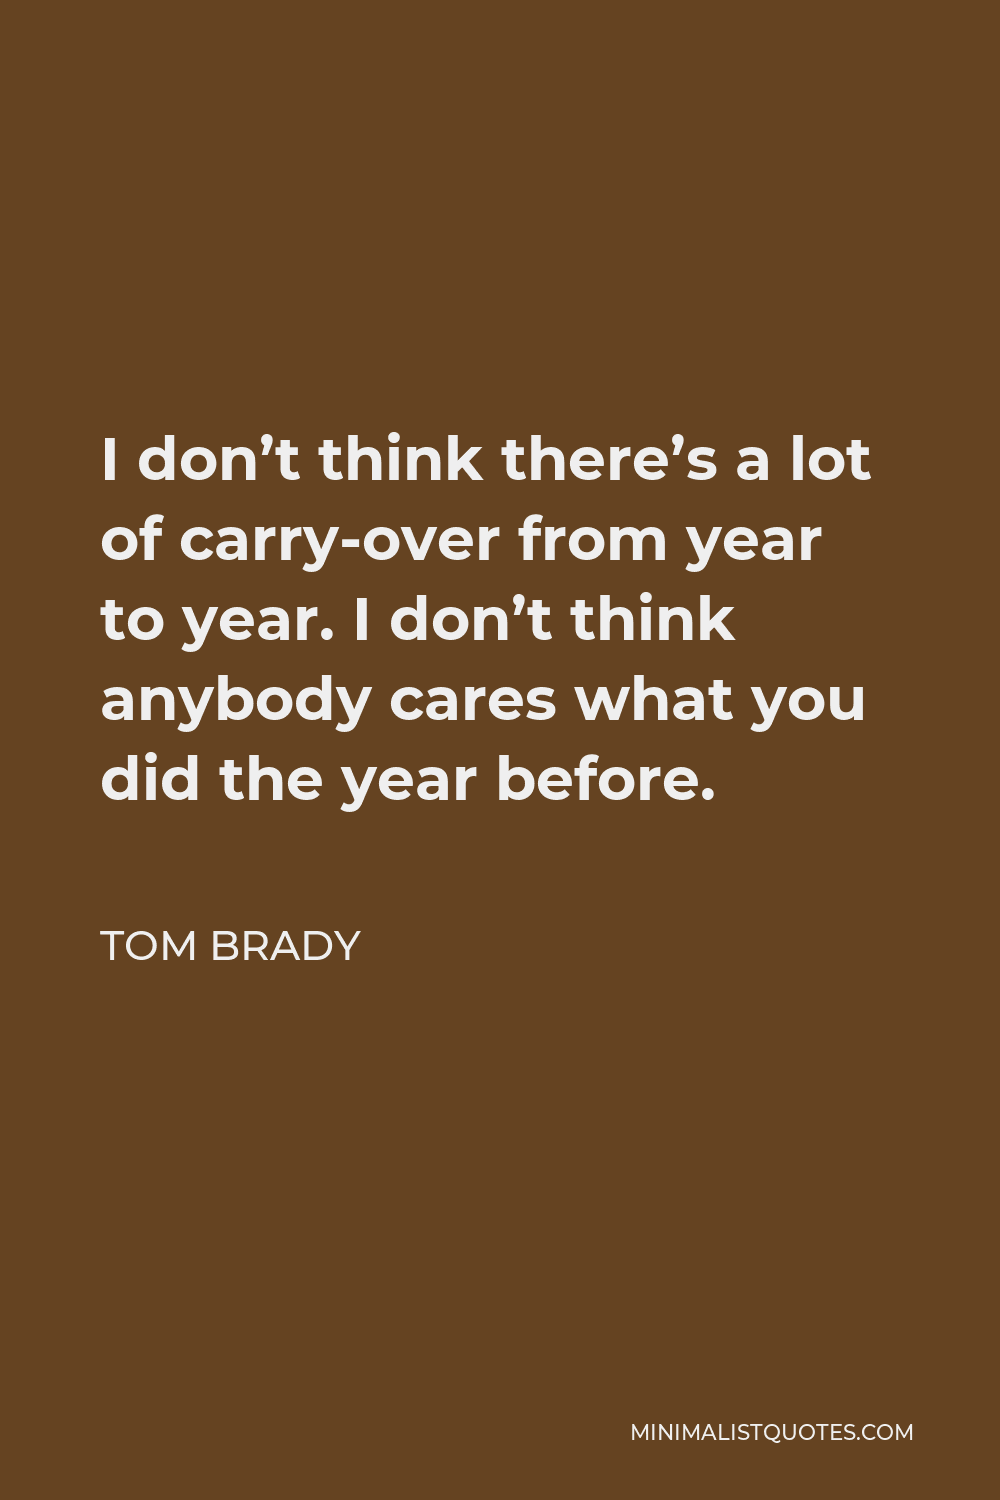 Tom Brady Quote - I don’t think there’s a lot of carry-over from year to year. I don’t think anybody cares what you did the year before.